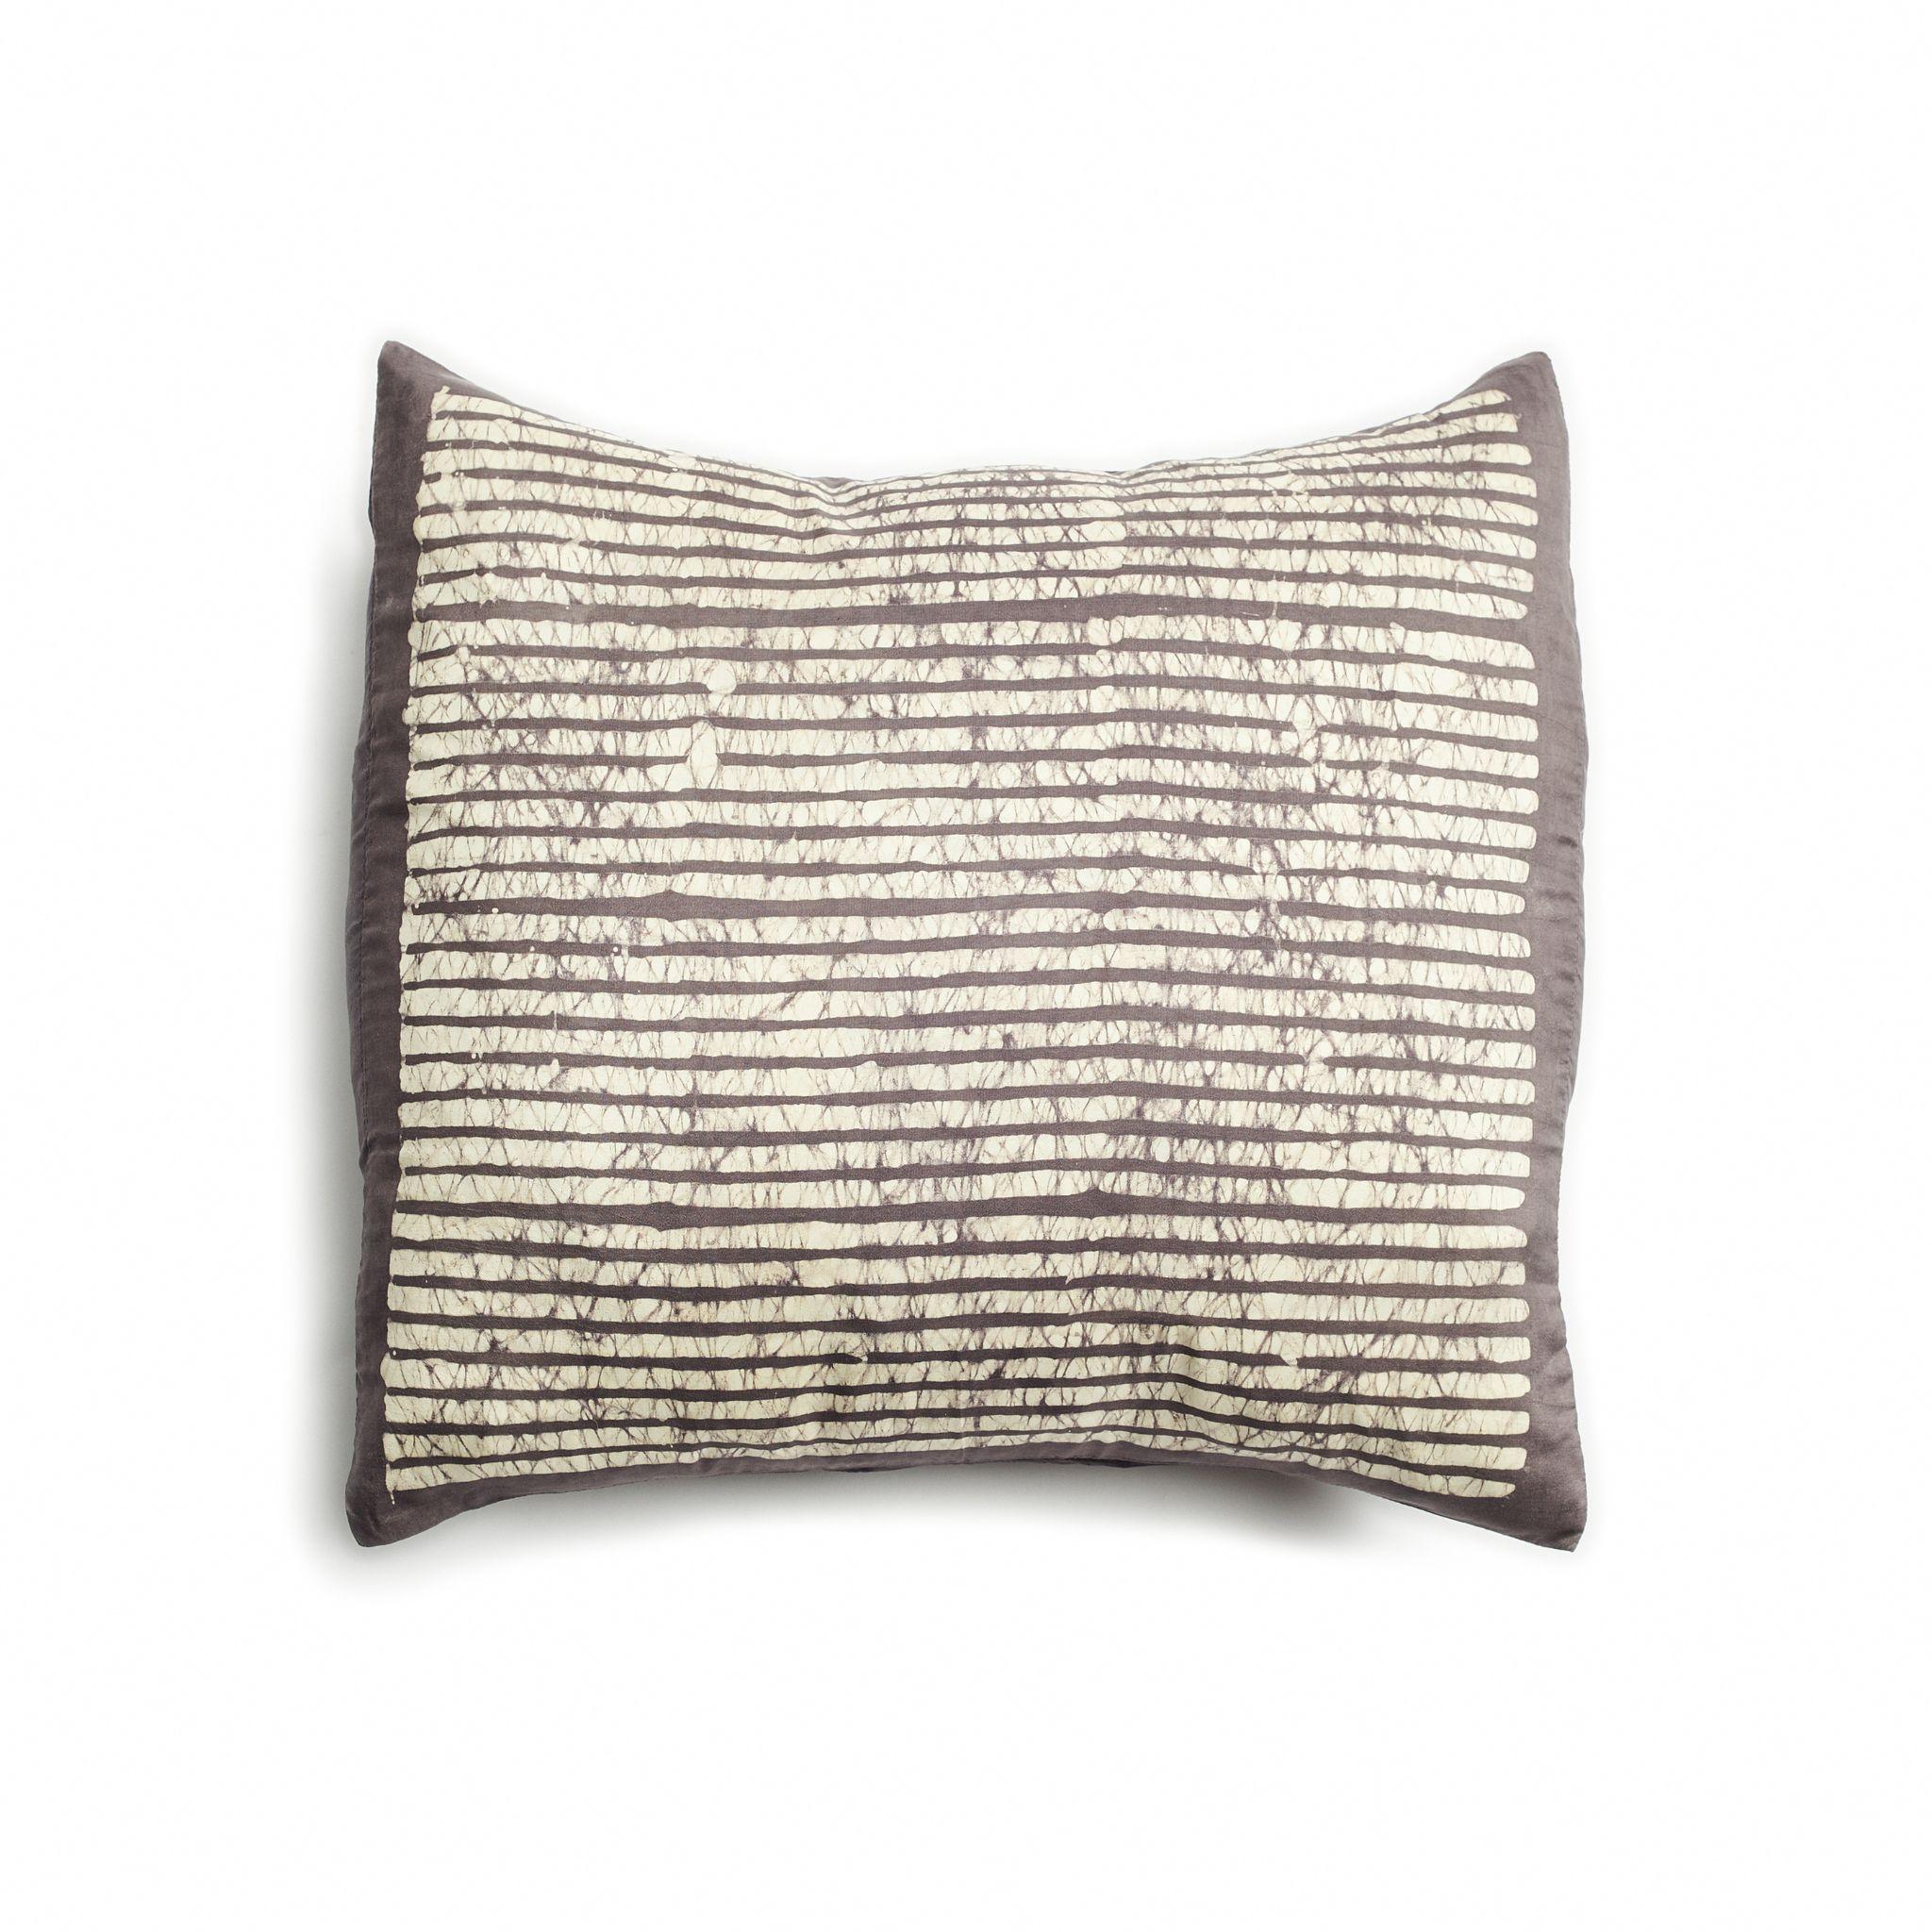 Indian Maple Black Silk Pillow In Stripes Motifs Handcrafted By Artisans  For Sale